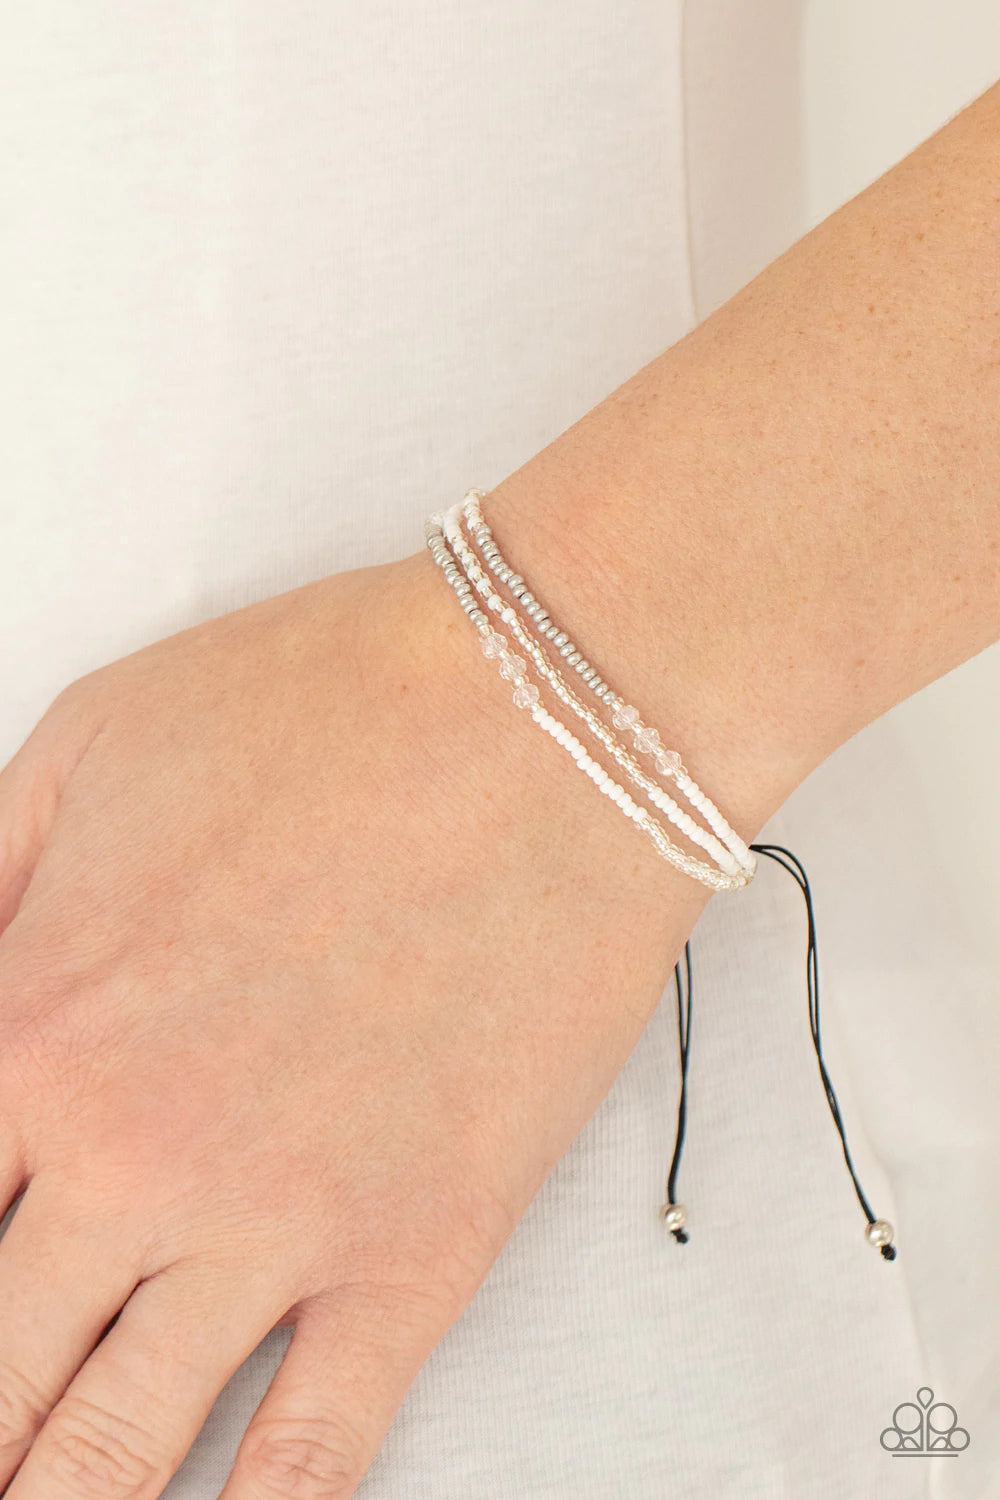 Paparazzi Accessories BEAD Me Up Scotty! - White Three strands of silver and white micro beads accented with sparkling clear multi-faceted beads give off a space-age vibe. Features an adjustable sliding knot closure. Sold as one individual bracelet. Jewel